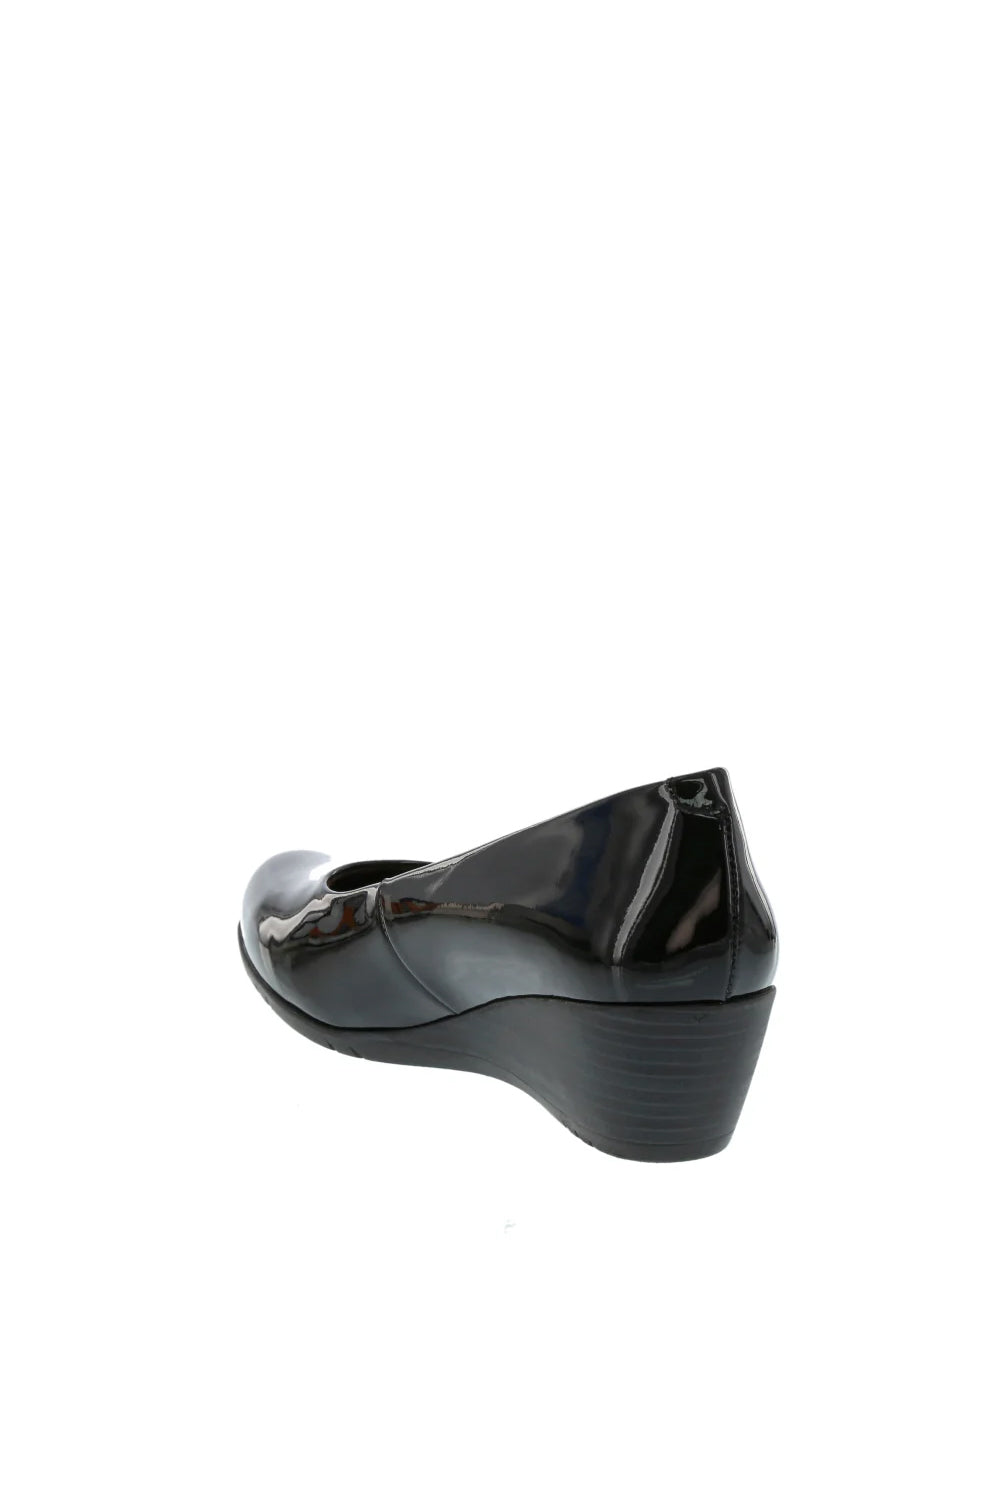 Neo Patent Leather Wedge Shoe in Black 6700